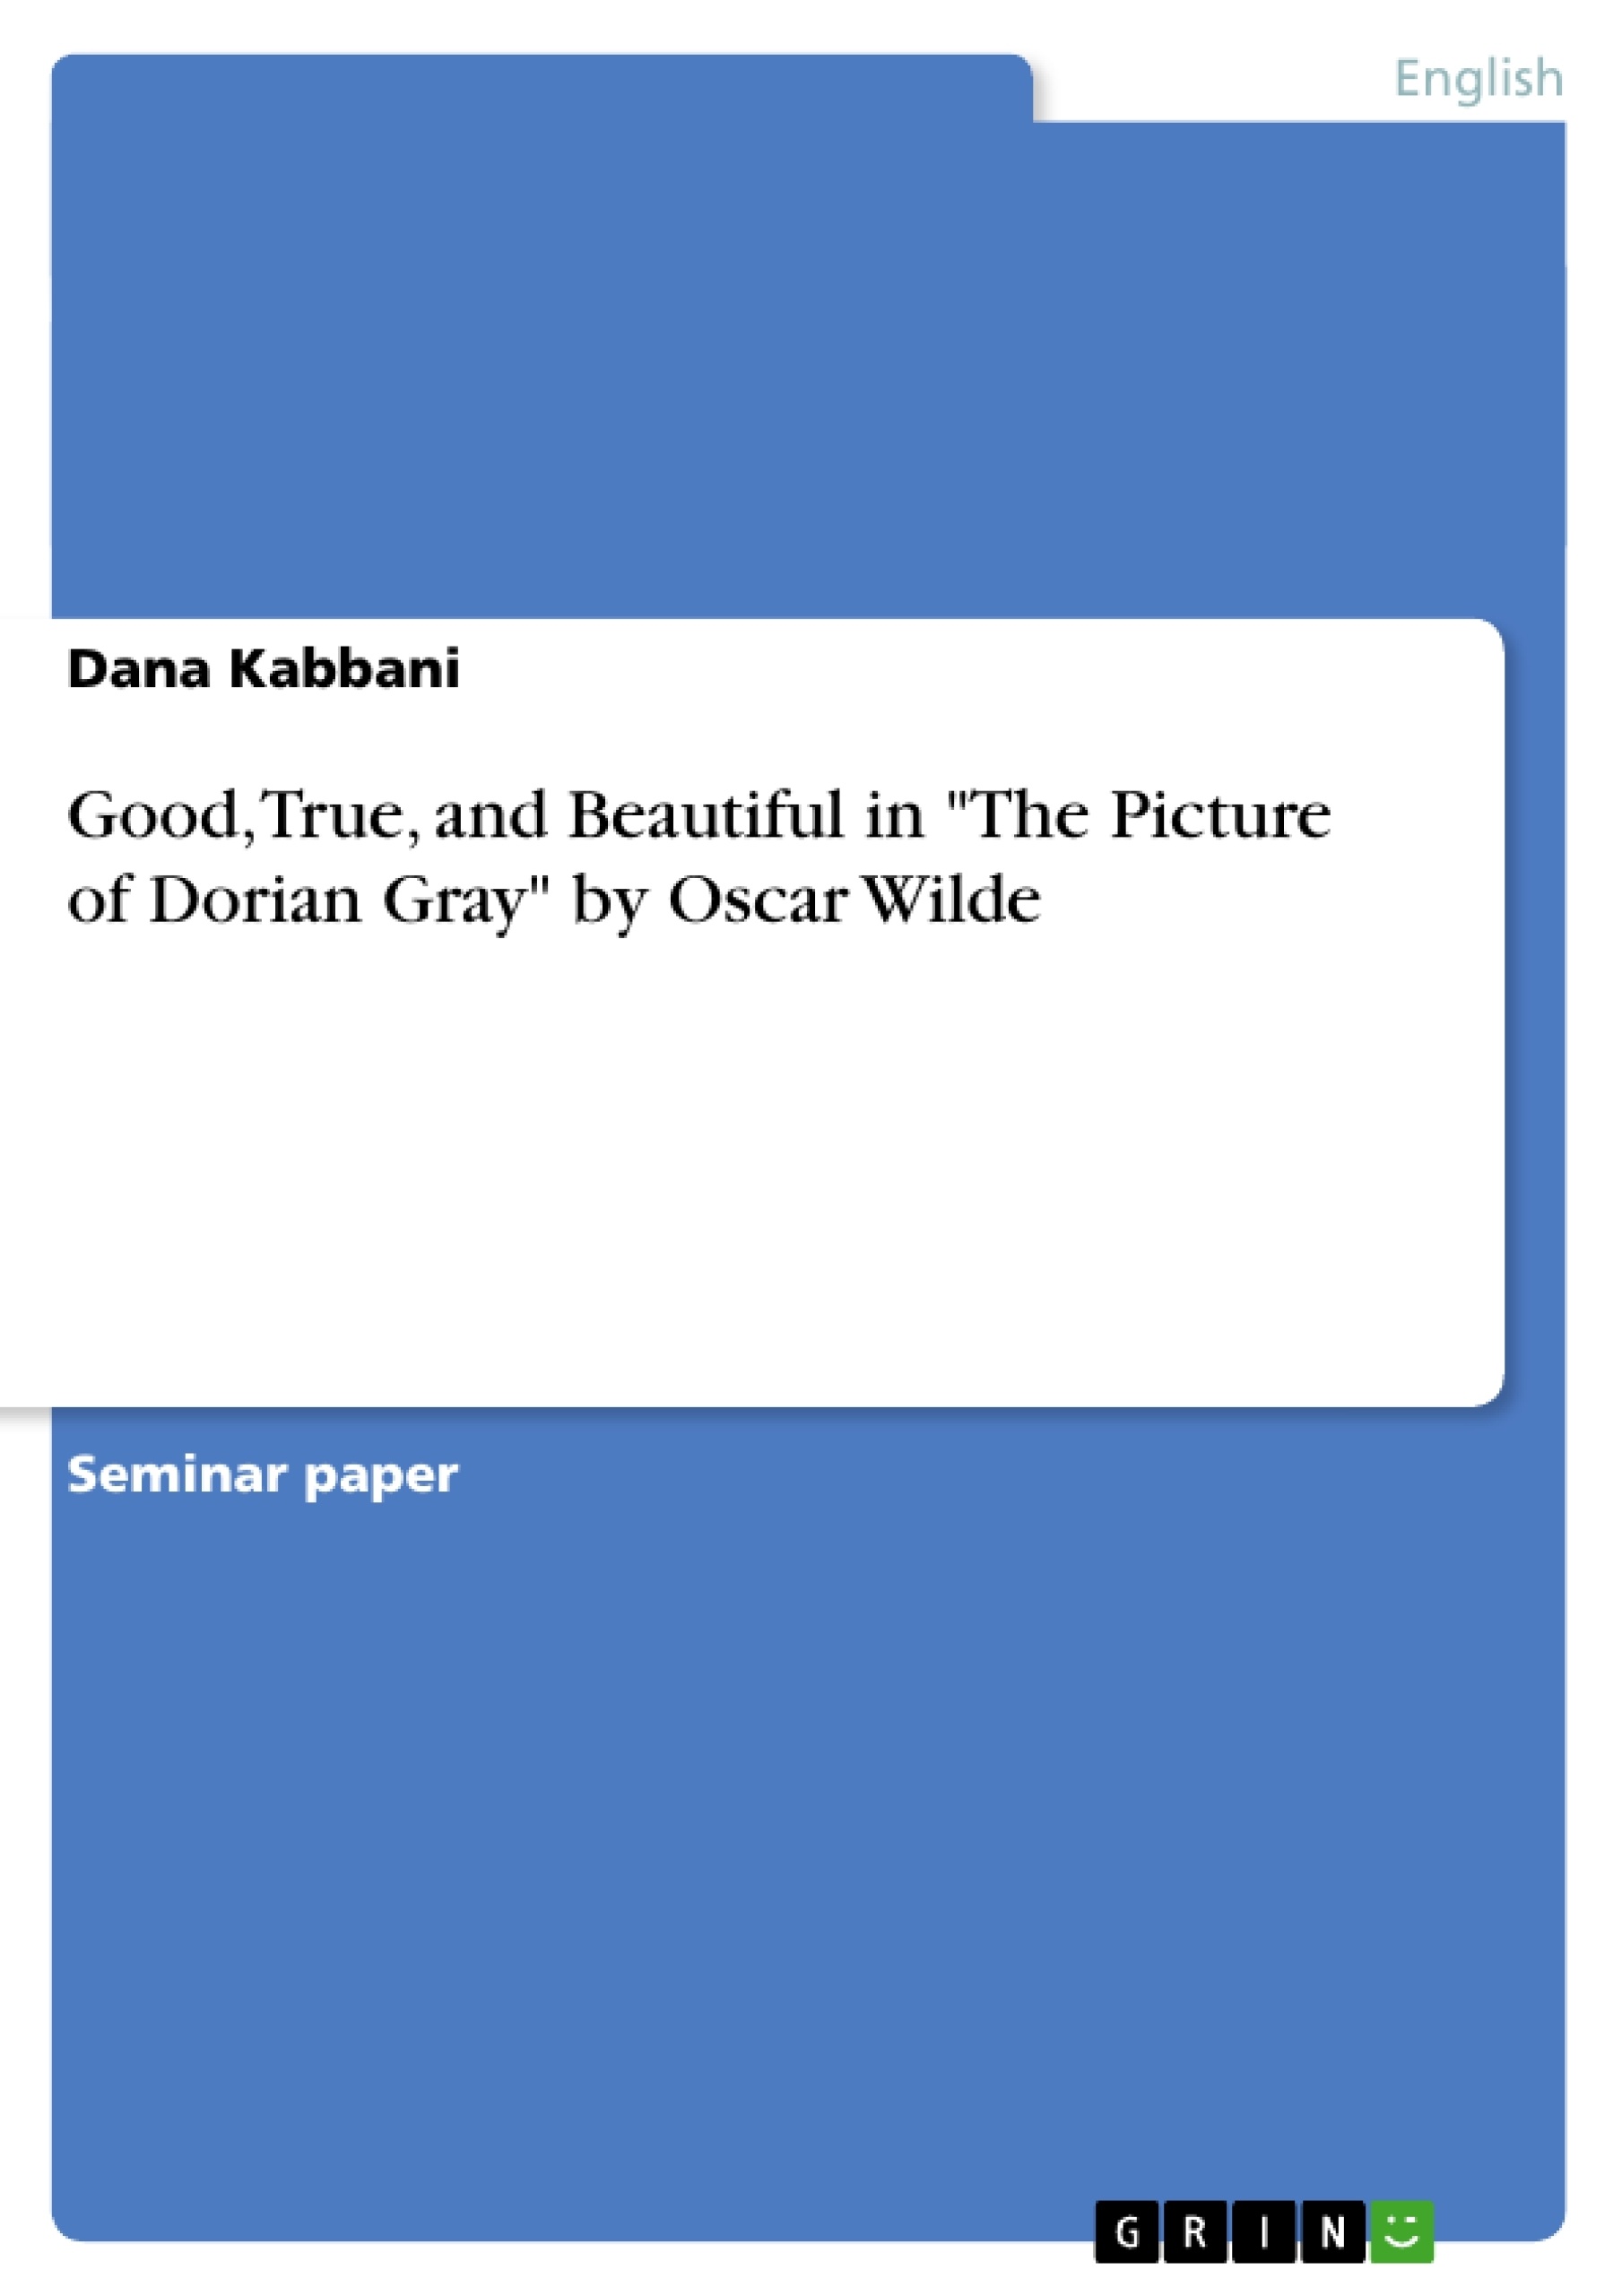 Title: Good, True, and Beautiful  in "The Picture of Dorian Gray" by Oscar Wilde